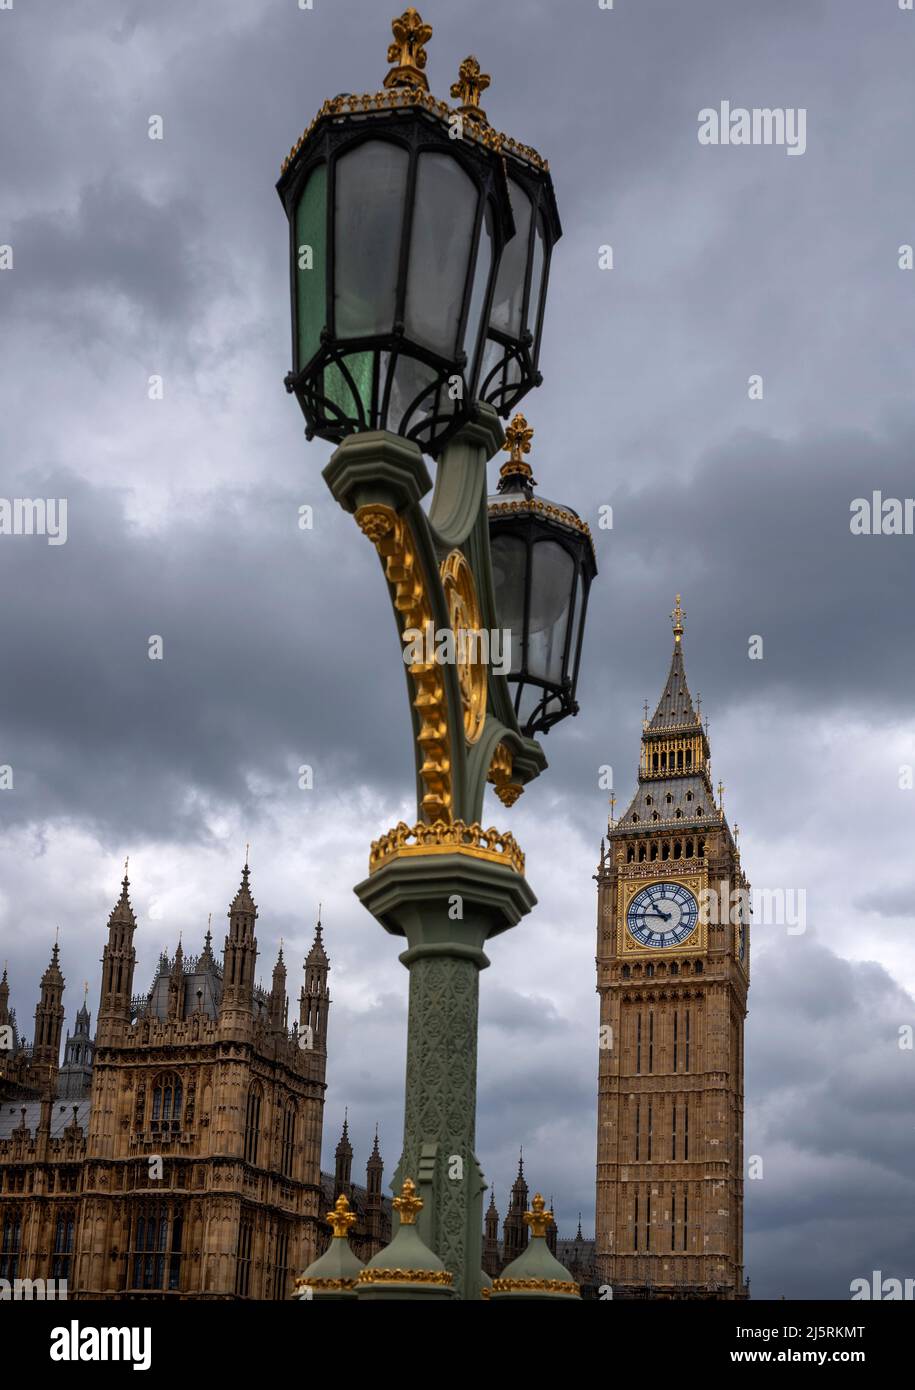 London England Houses of Parliament Big Ben Elizabeth Tower Cleaned April 2022 The Elizabeth Tower and the Clock Face of Big Ben shine after major cle Stock Photo